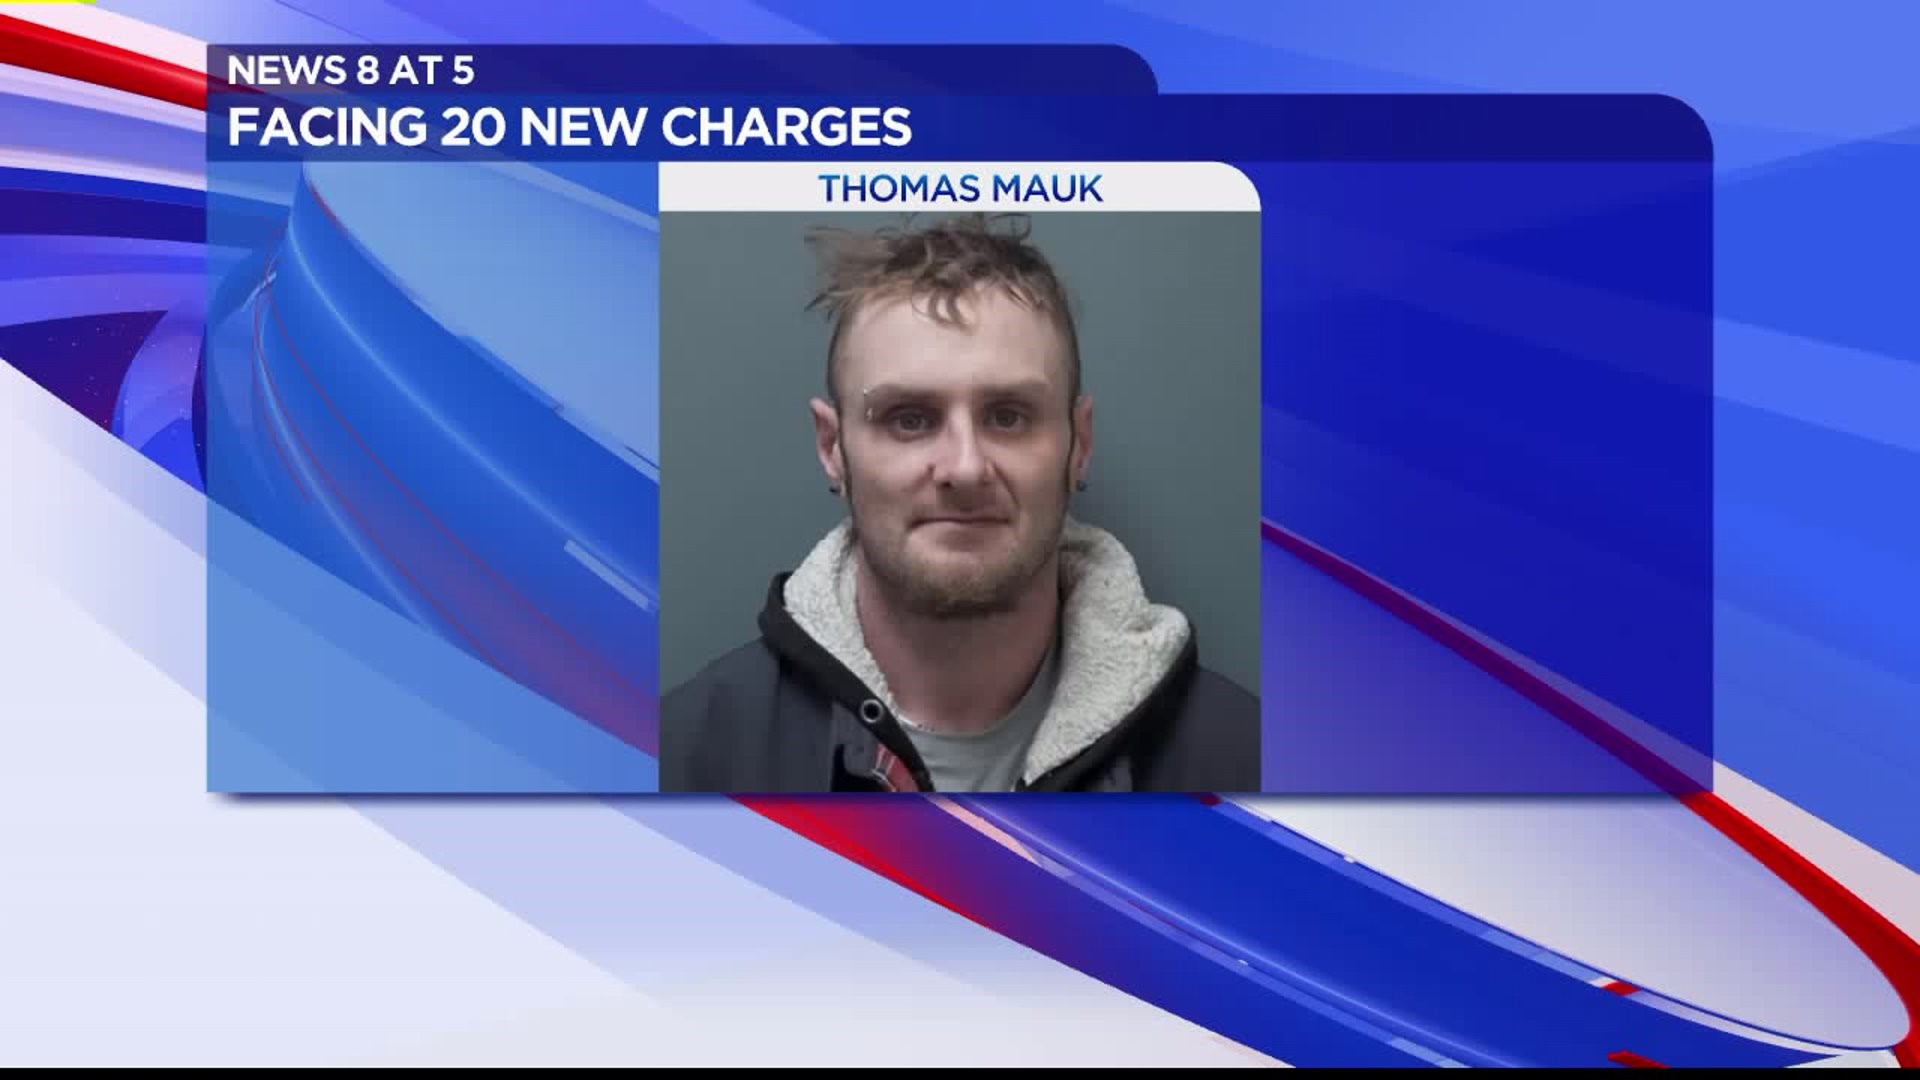 Clinton man facing new charges